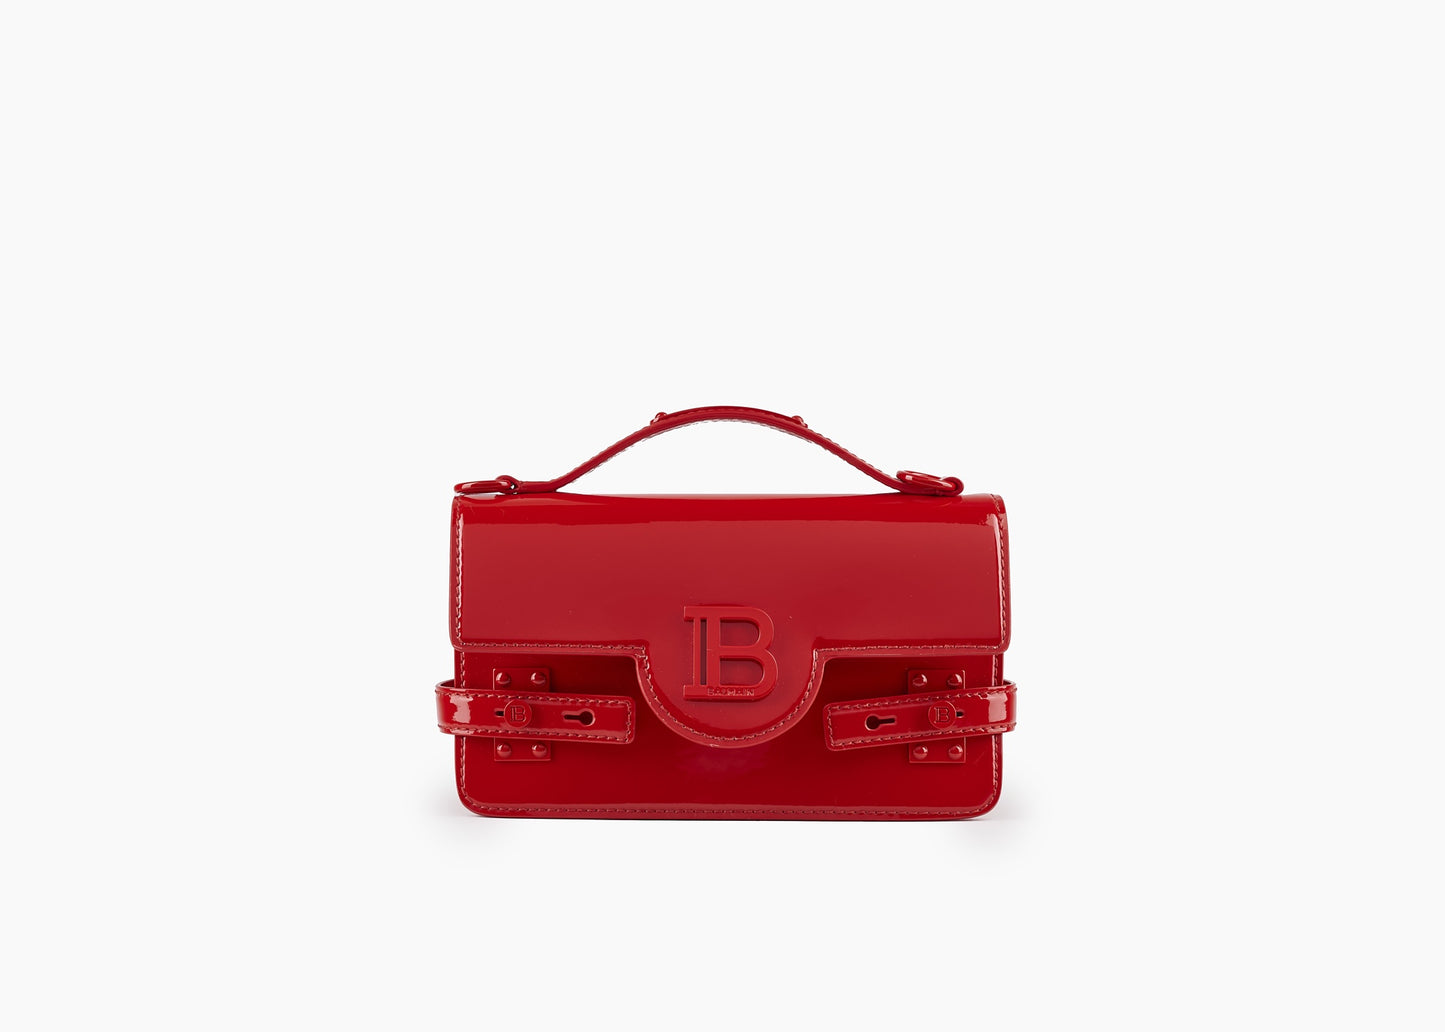 B-Buzz 24 Shoulder Bag Patent Leather Red